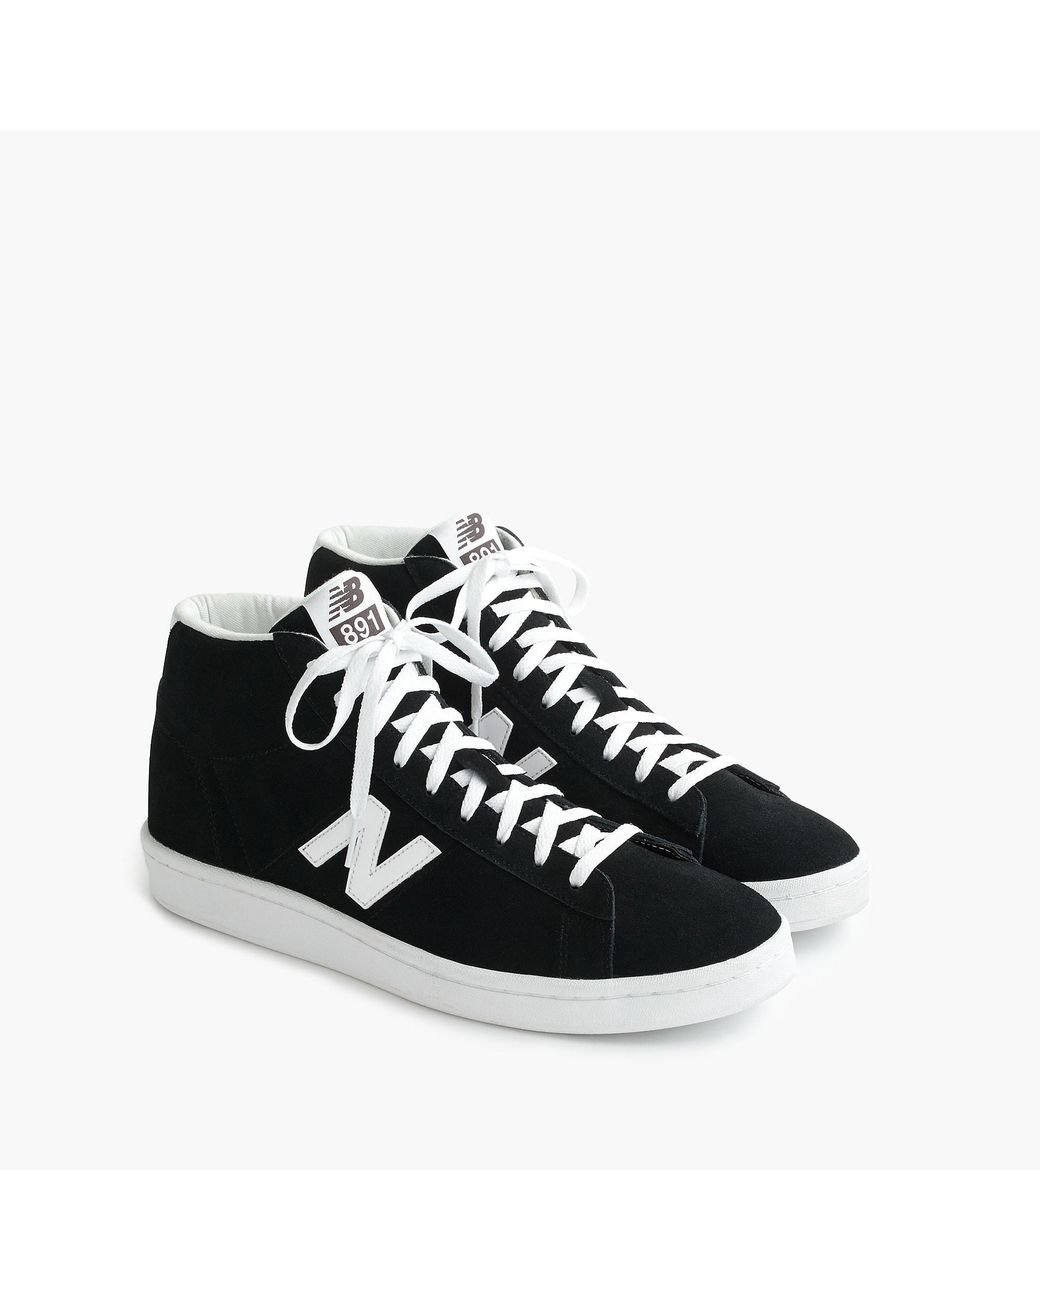 New Balance ® For J.crew 891 High-top Sneakers in Black for Men | Lyst